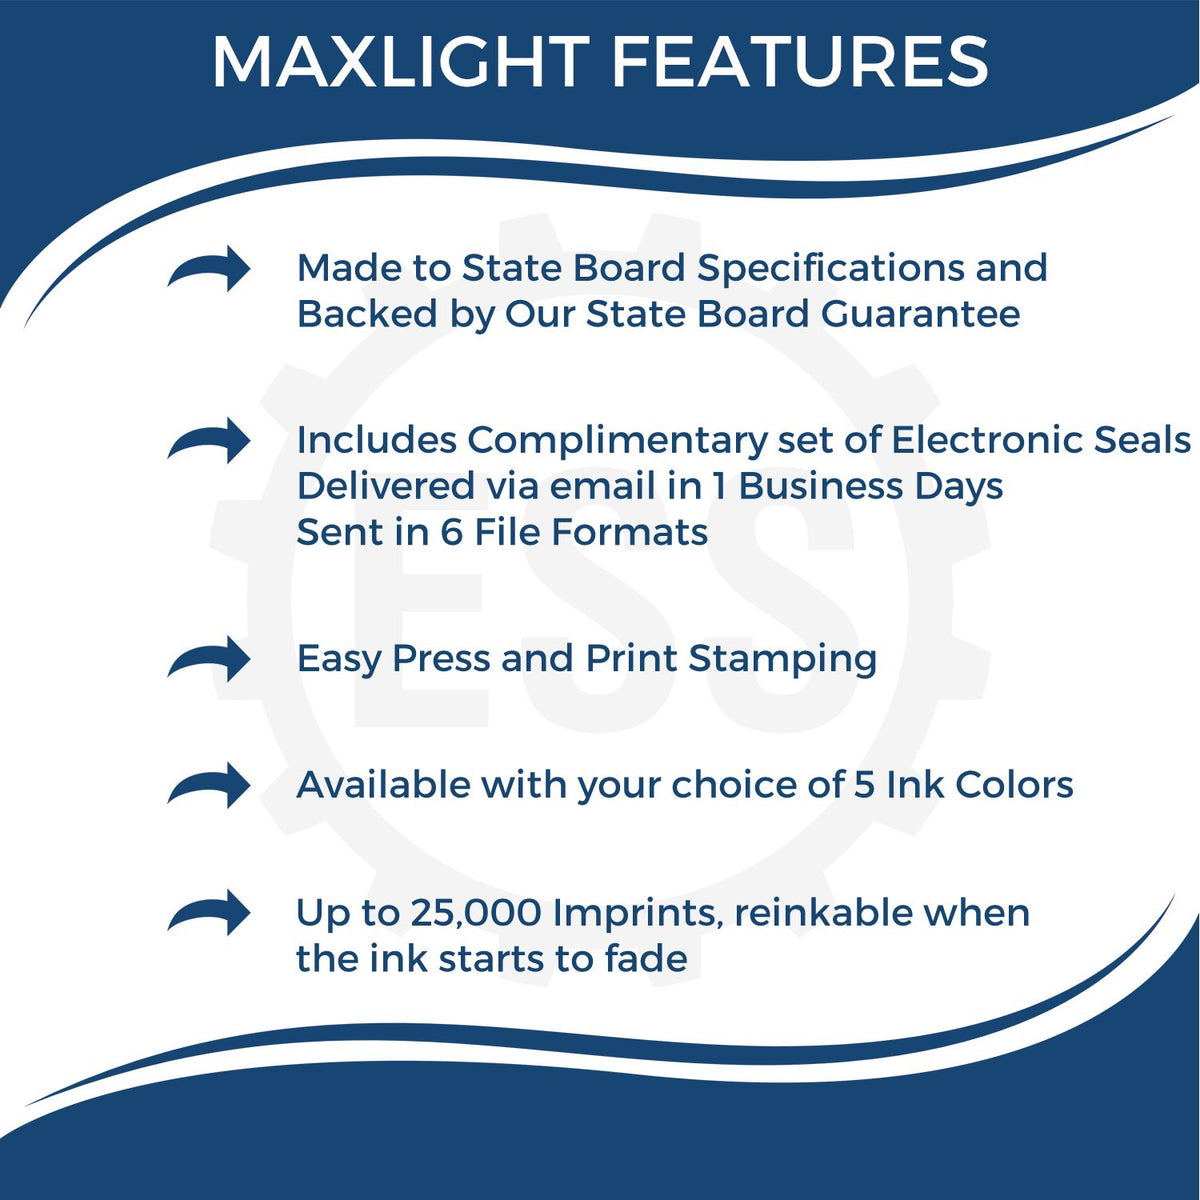 A picture of an infographic highlighting the selling points for the Premium MaxLight Pre-Inked Ohio Geology Stamp